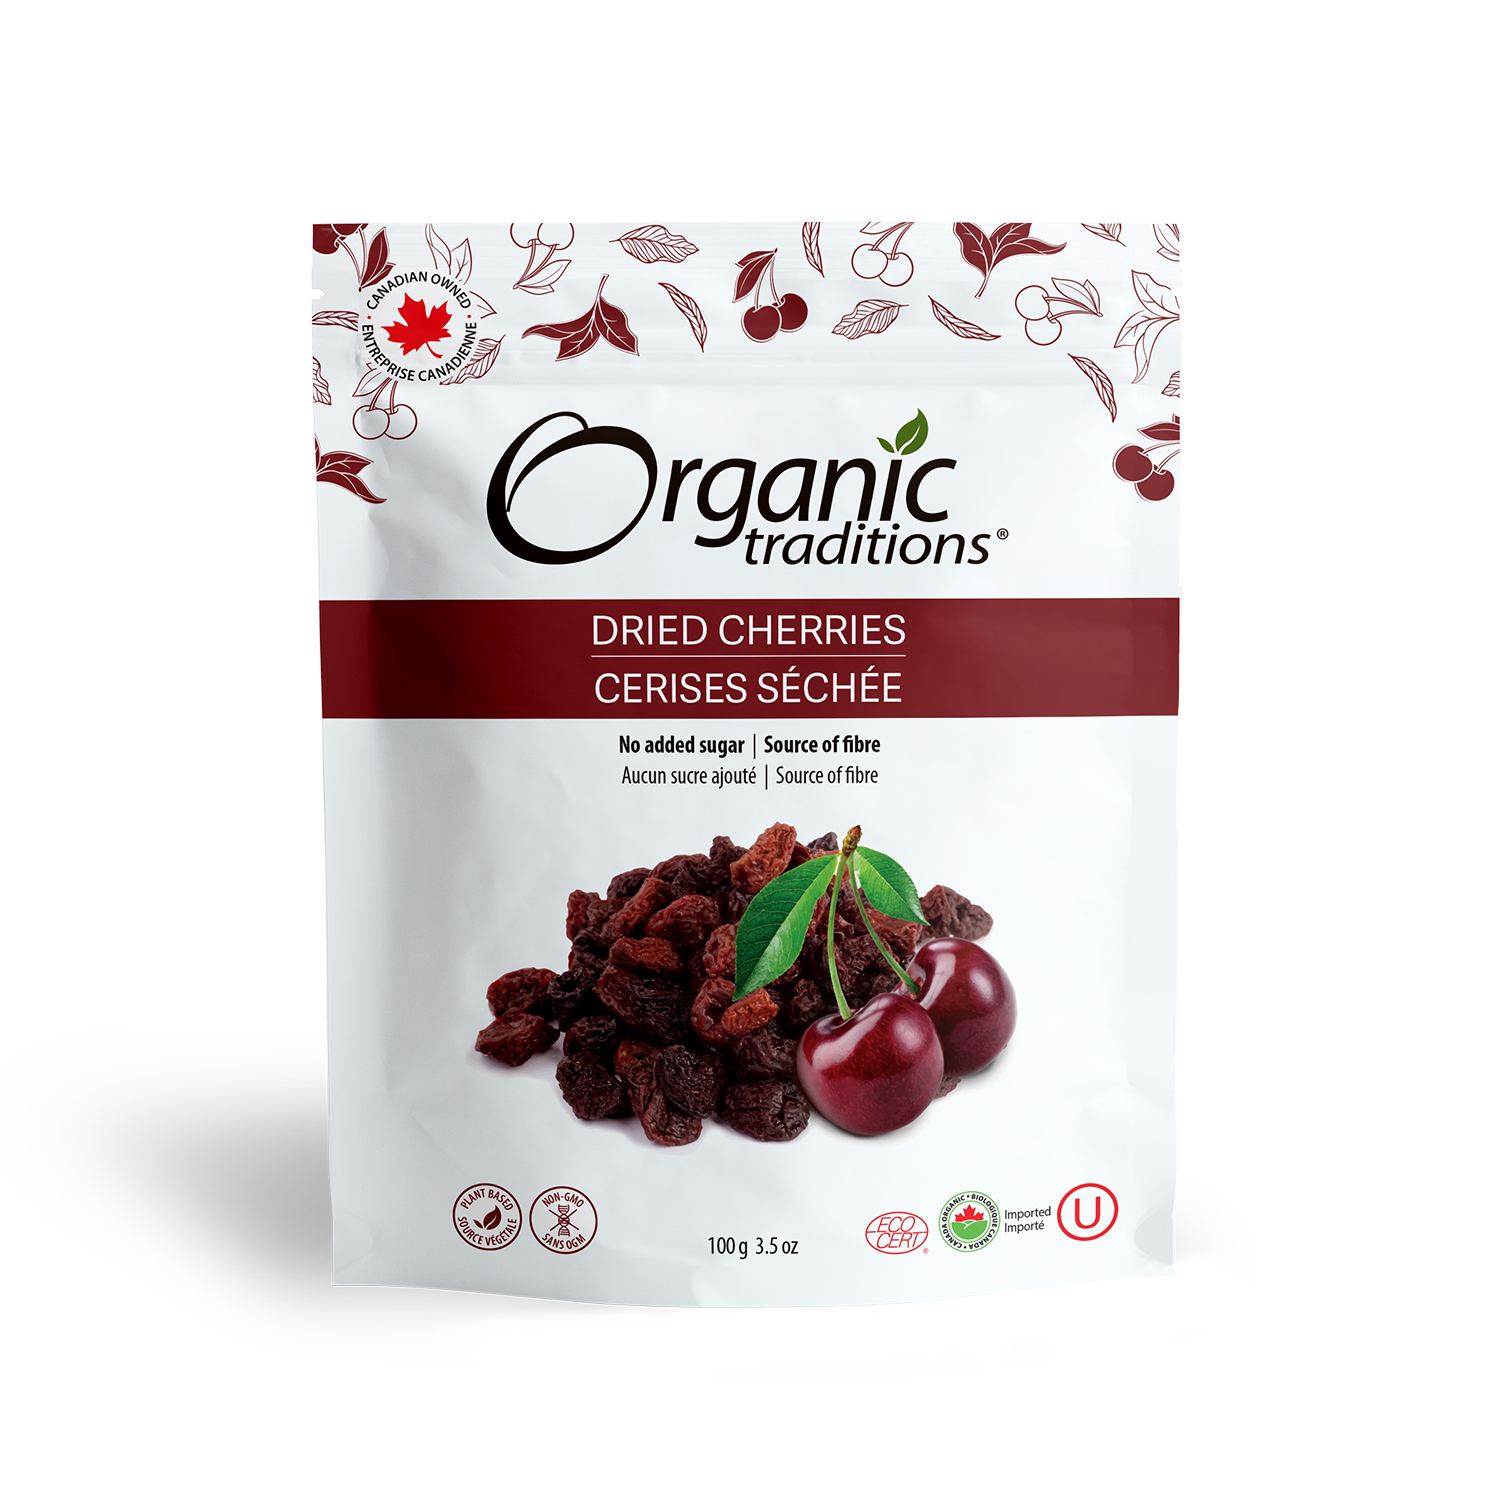 organic traditions dried cherries front of bag image